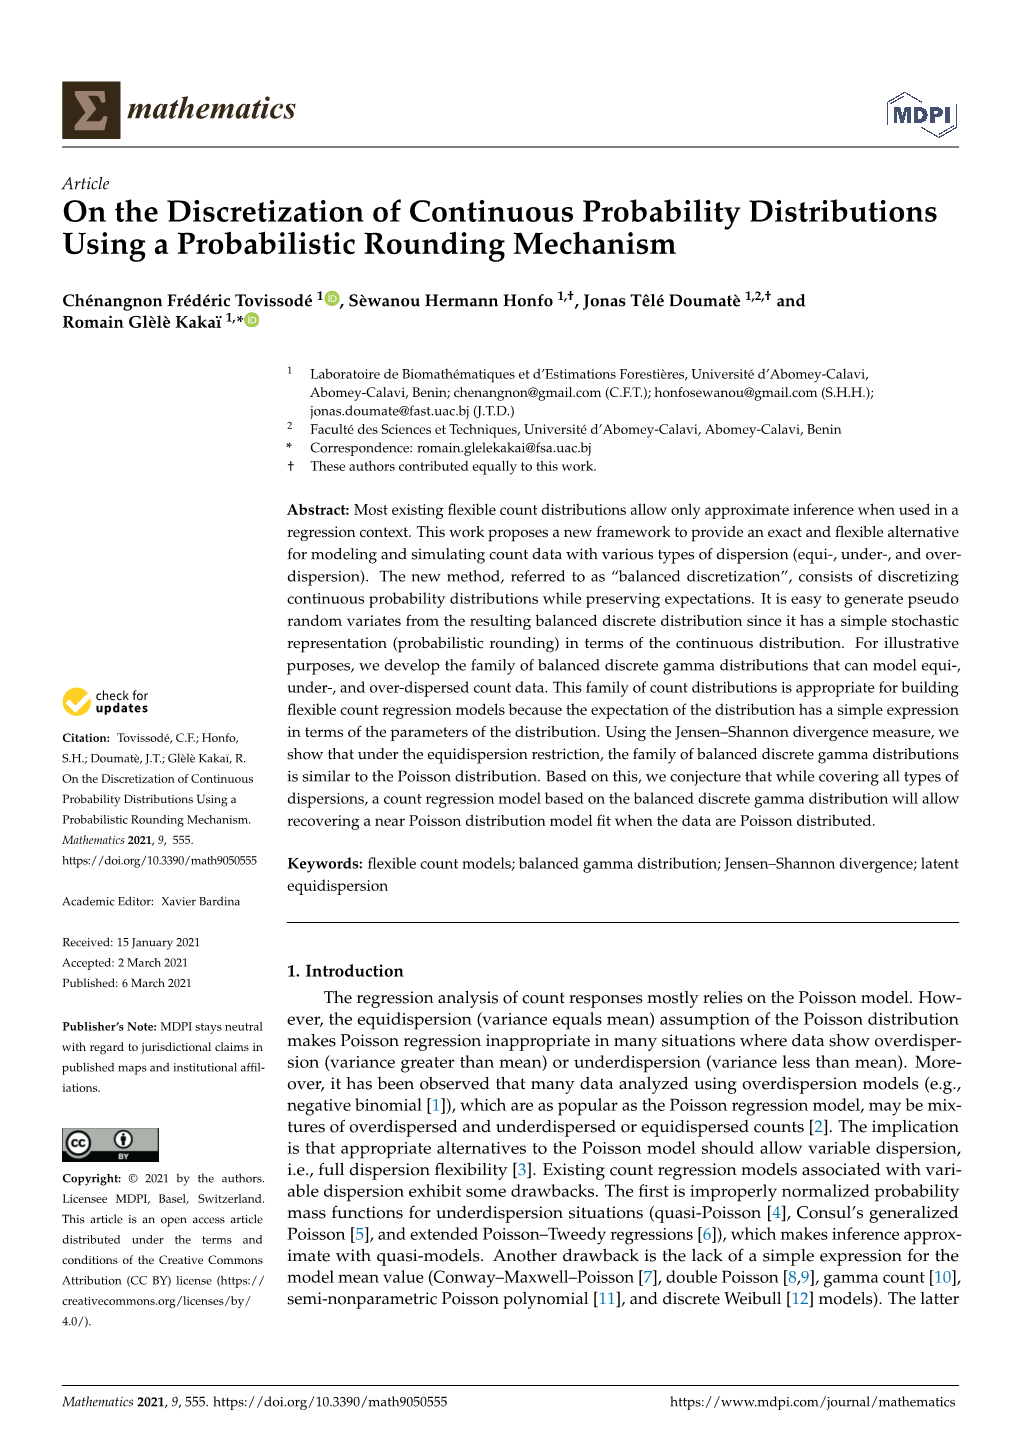 On the Discretization of Continuous Probability Distributions Using a Probabilistic Rounding Mechanism